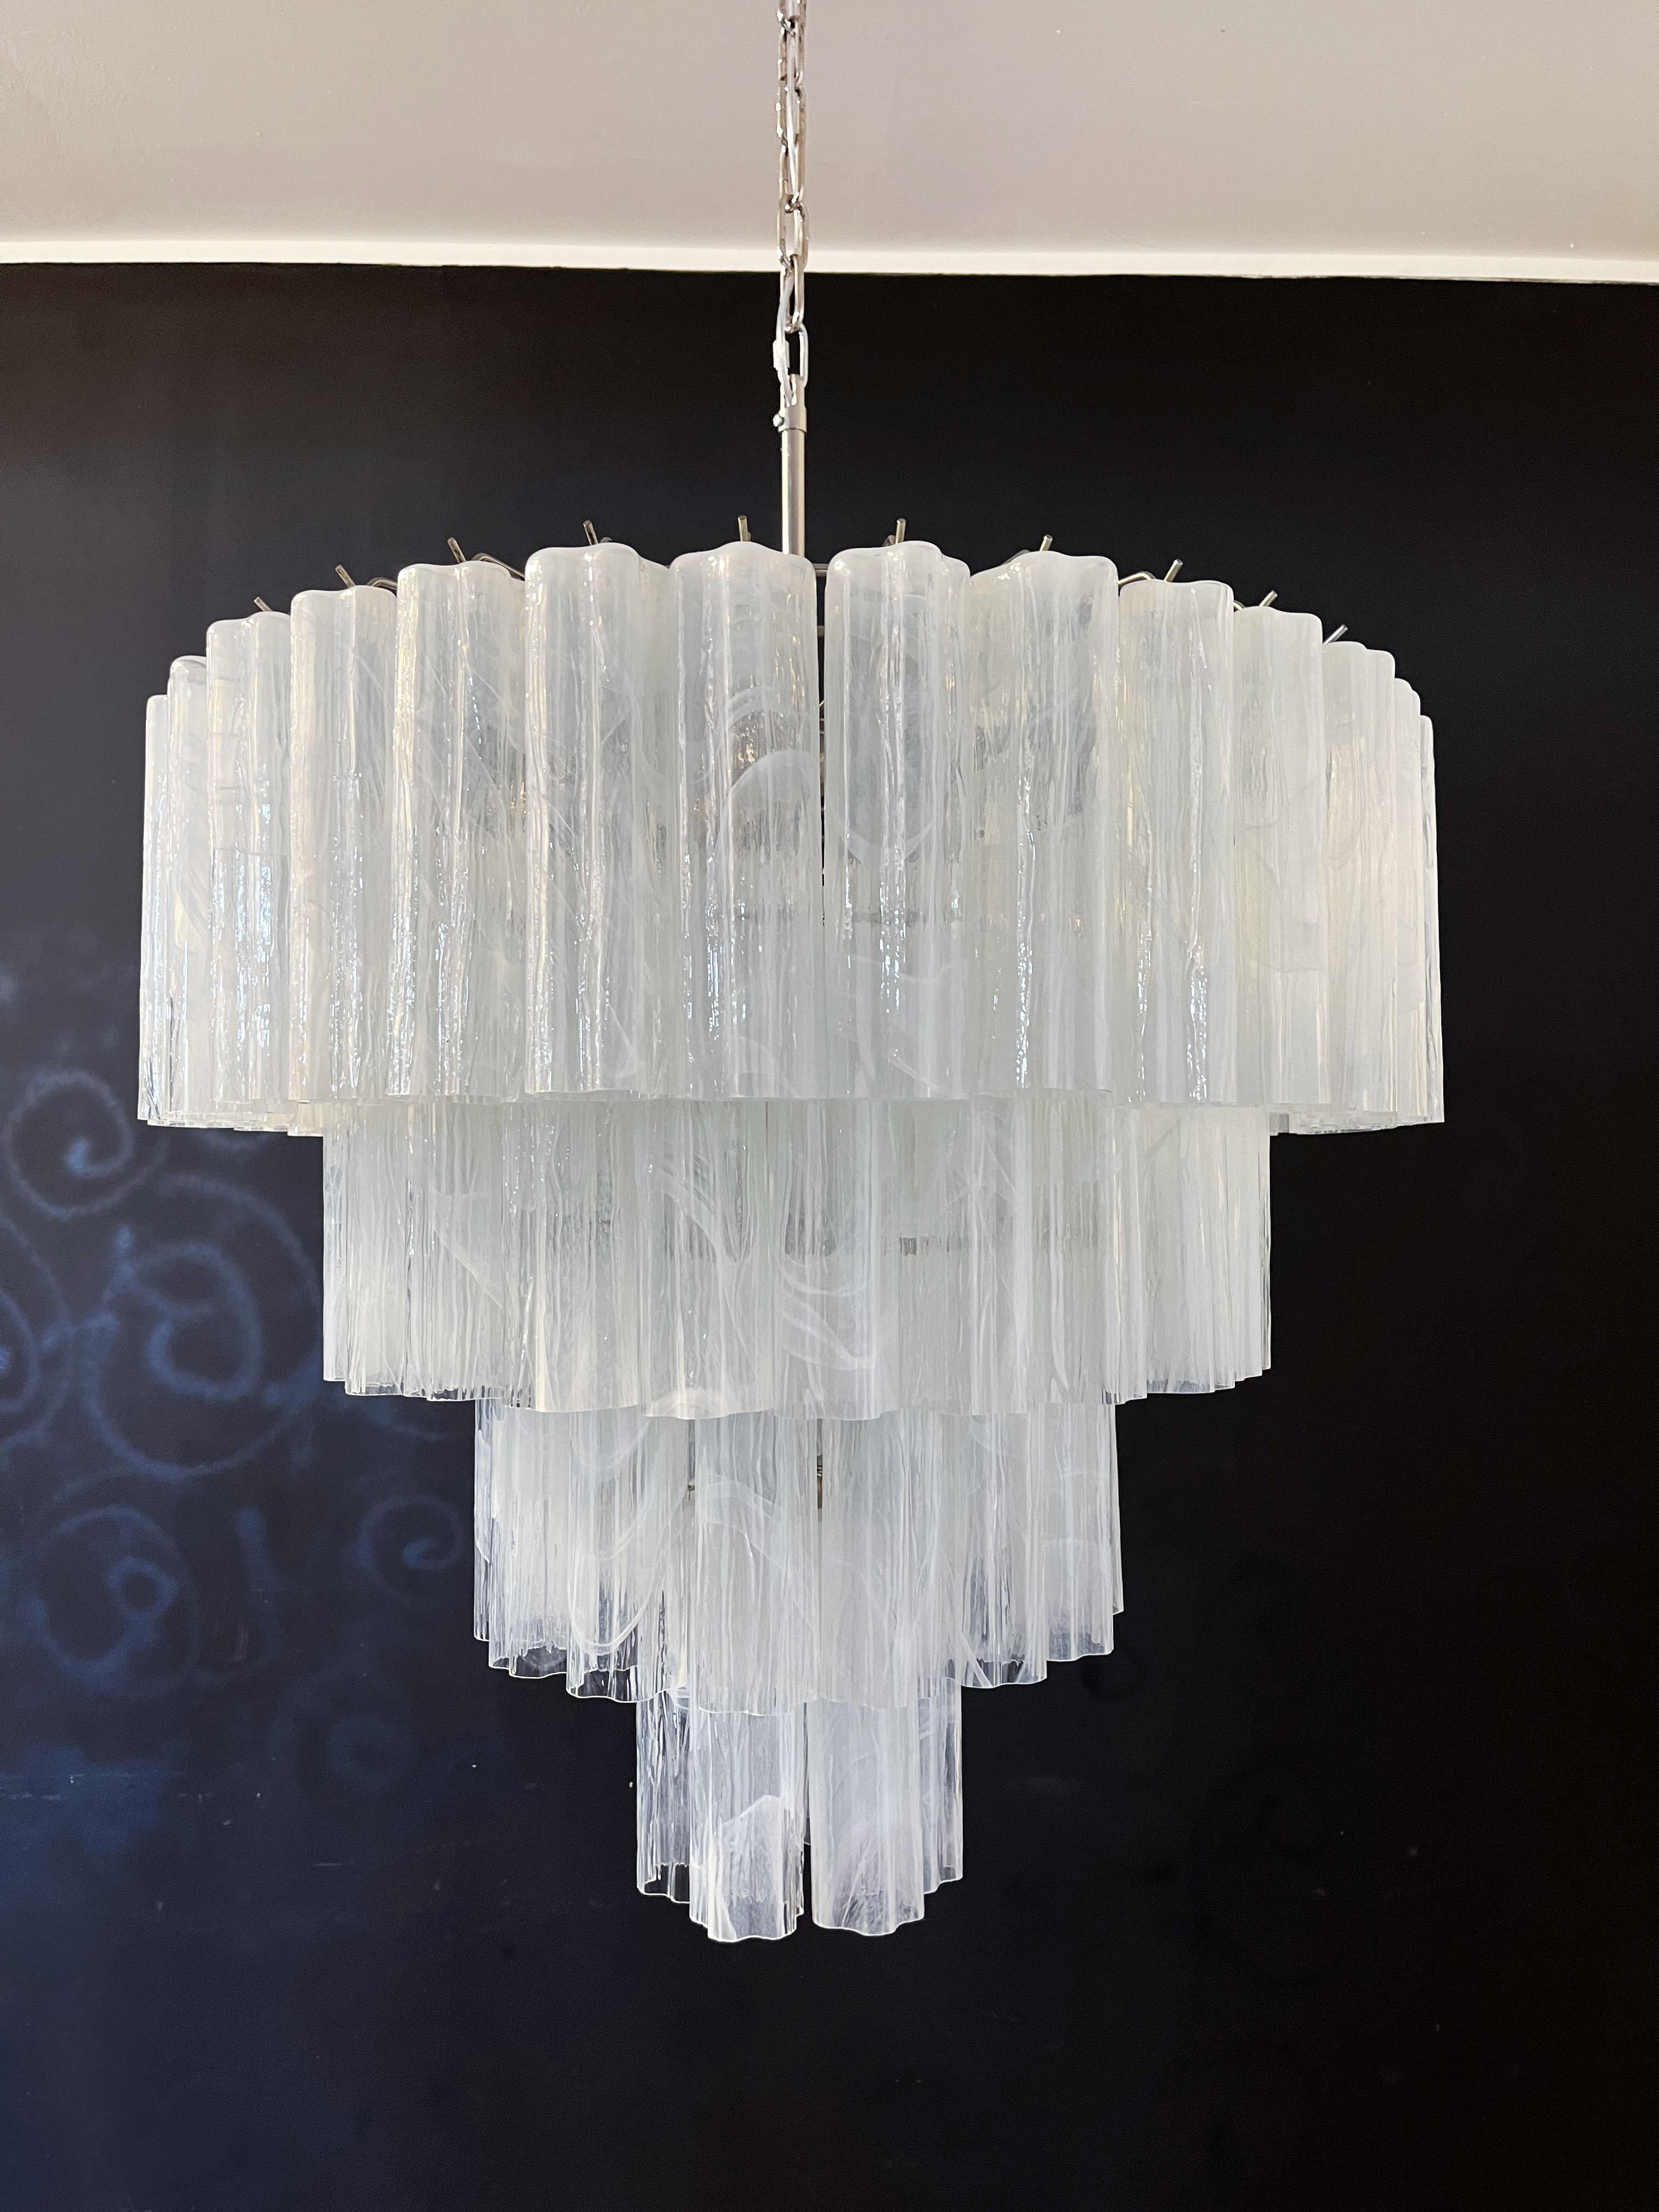 Italian vintage chandelier in Murano glass and nickel plated metal structure on 4 levels. The armor polished nickel supports 78 large albaster white glass tubes in a star shape. 

Period: Late XX century
Dimensions: 63 inches (160 cm) height with